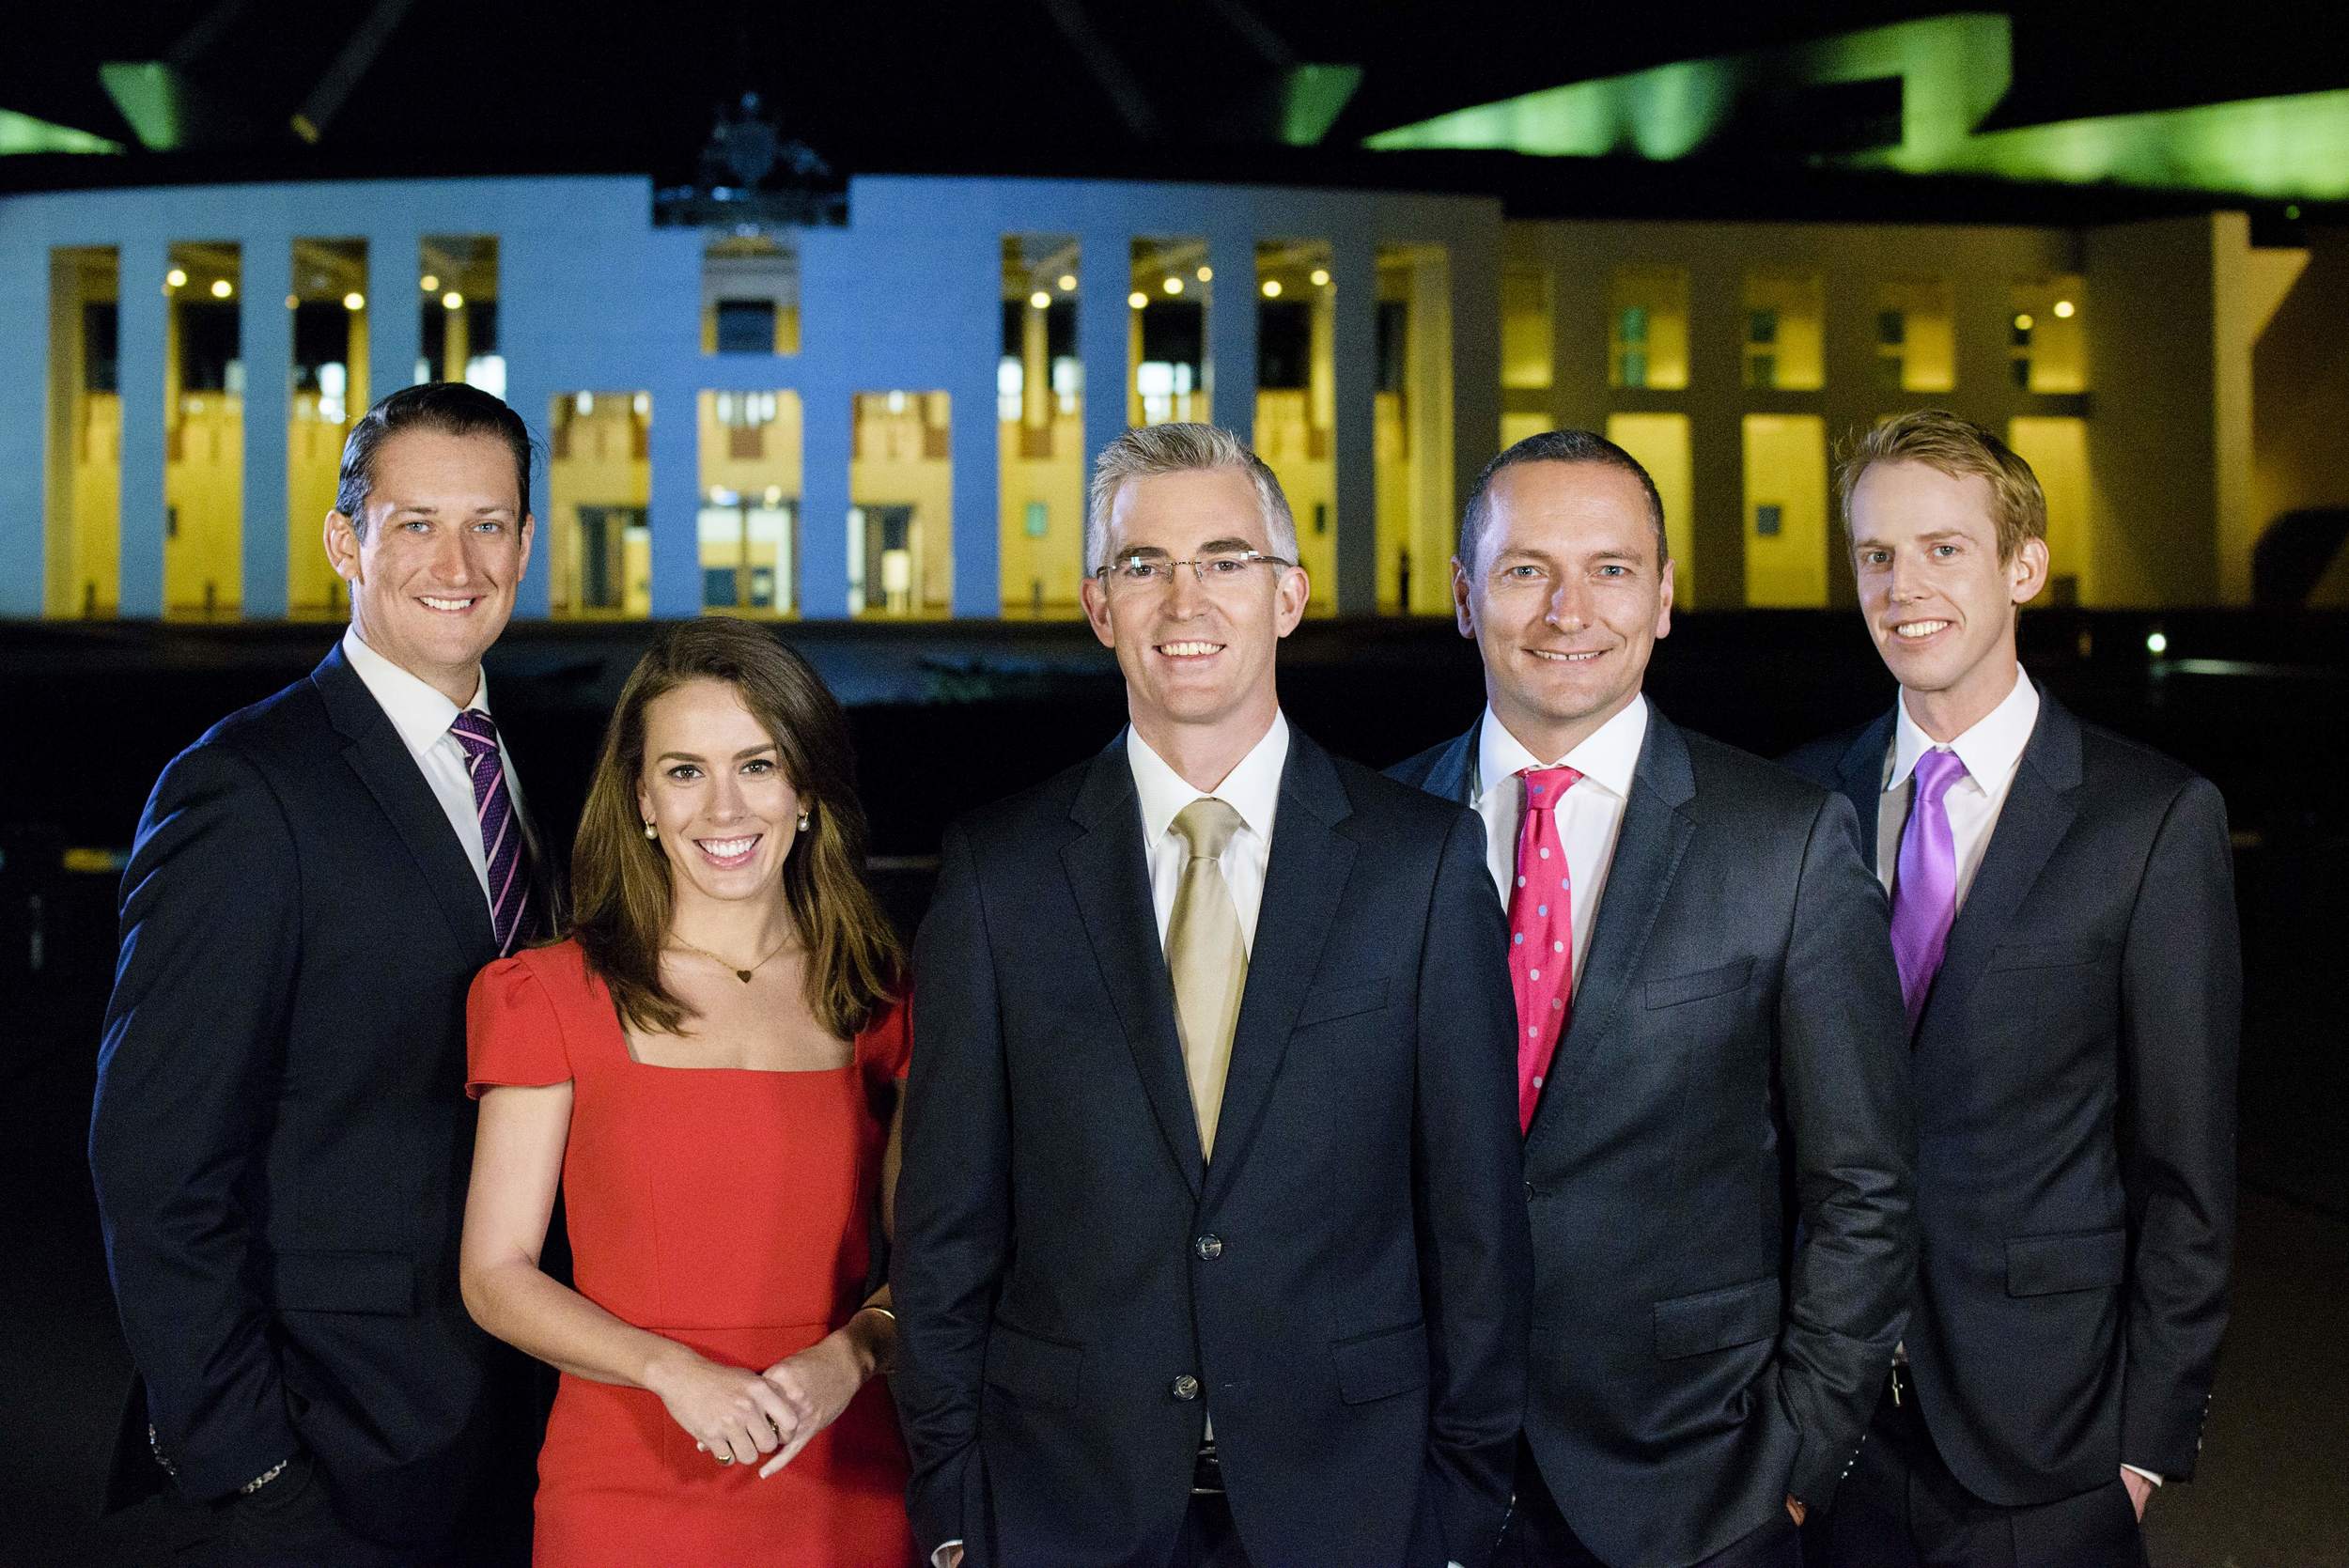   The Sky News Canberra Political Team - Dan Bourchier, Laura Jayes, David Speers, Kieran Gilbert and Tom Connell.  image - supplied/Sky News Australia 